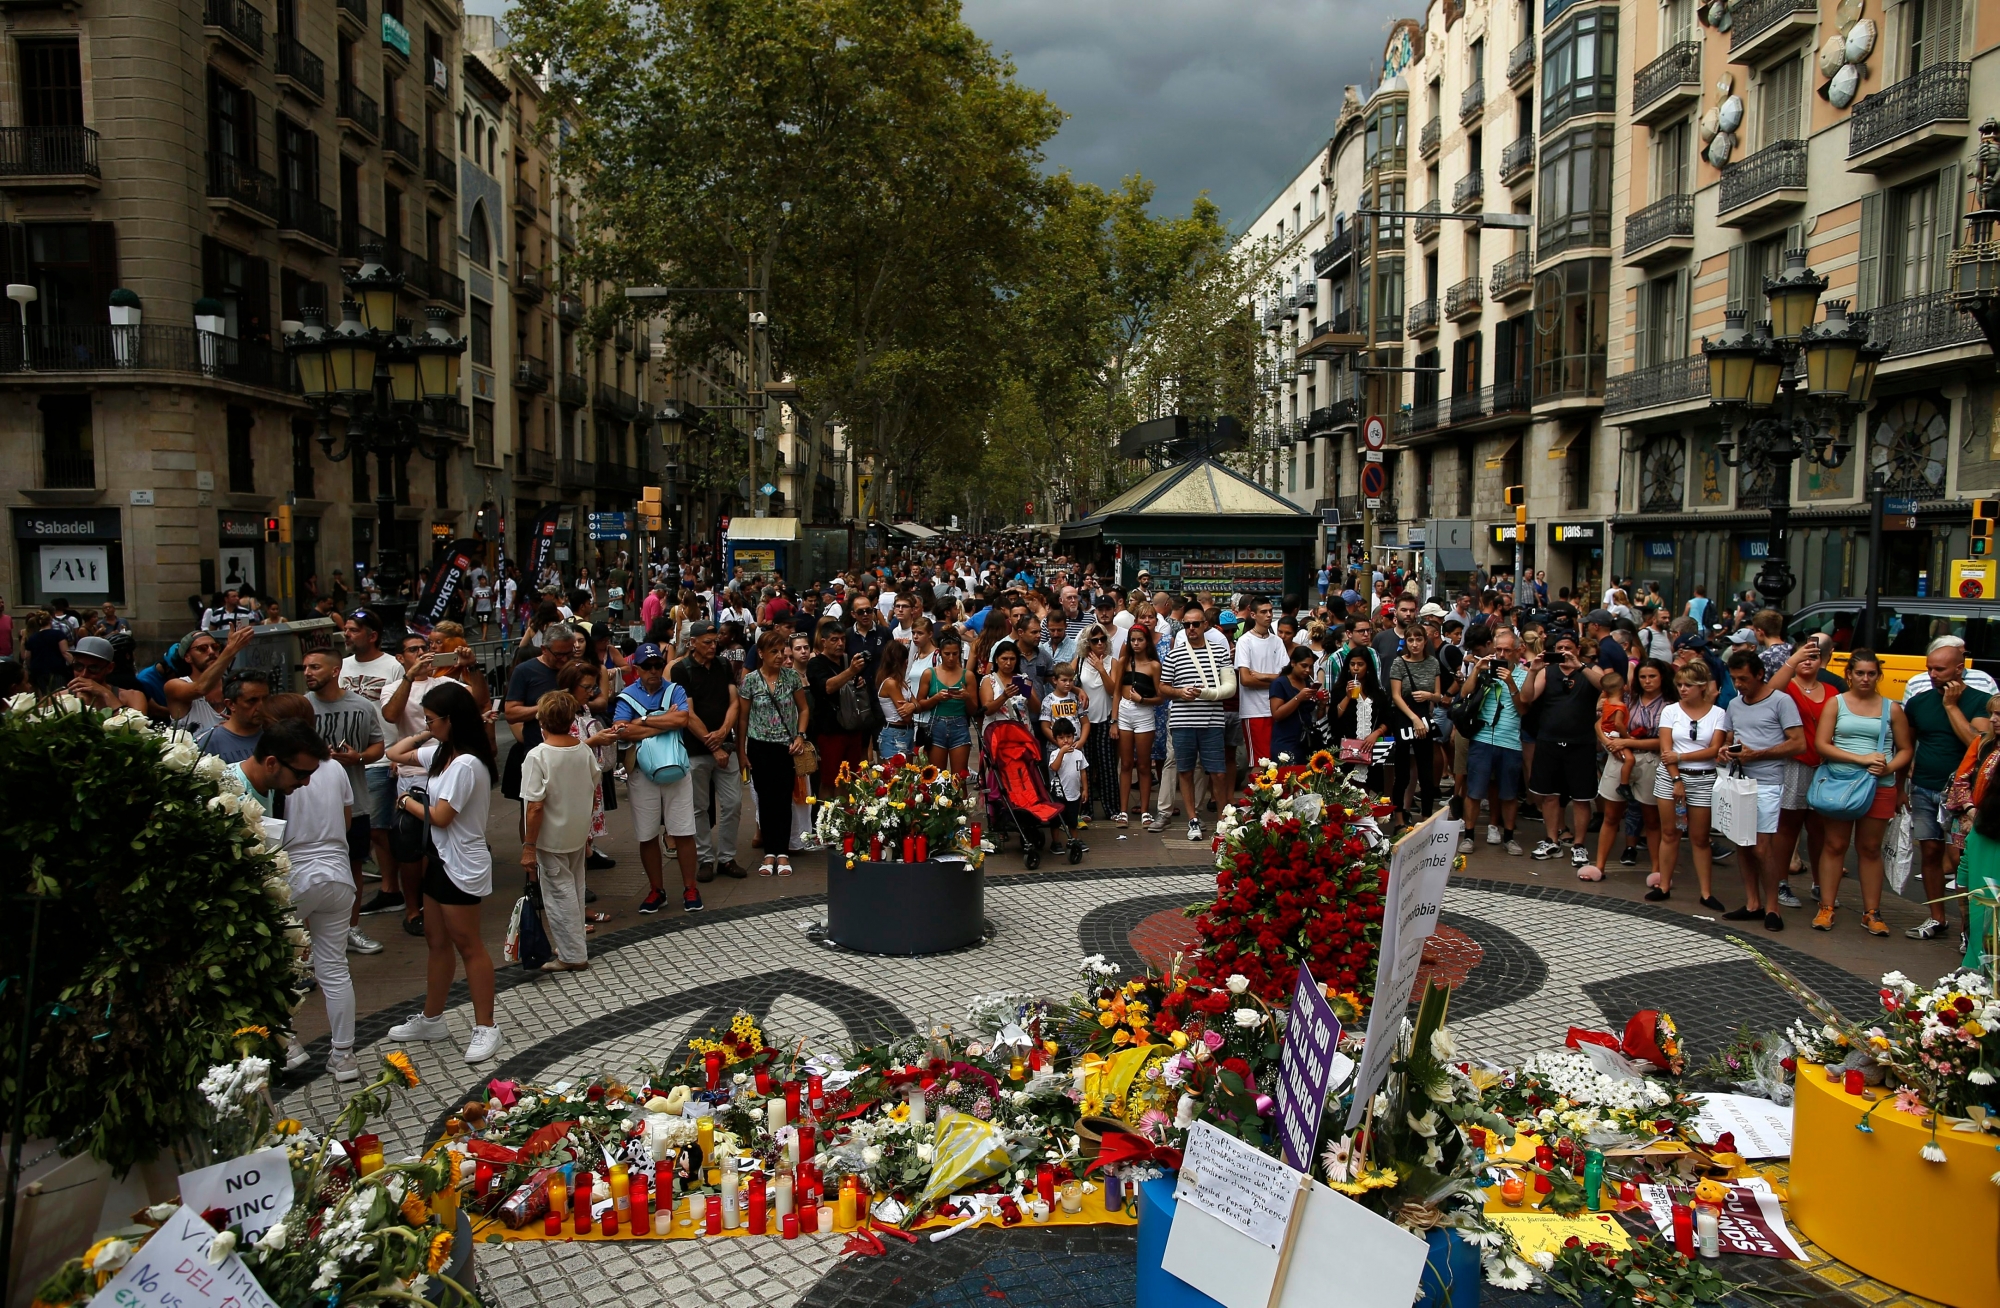 People gather next to at floor mosaic by Catalan artist Joan Miro where the van driven by the attacker stopped in Barcelona, Spain, Friday, Aug. 17, 2018. Barcelona on Friday marked the first anniversary of terror attacks that killed 16 people, with commemorations attended by Spain's King Felipe VI, Queen Letizia, Prime Minister Pedro Sanchez, other government officials and hundreds of people. (AP Photo/Manu Fernandez) Spain Attacks Anniversary